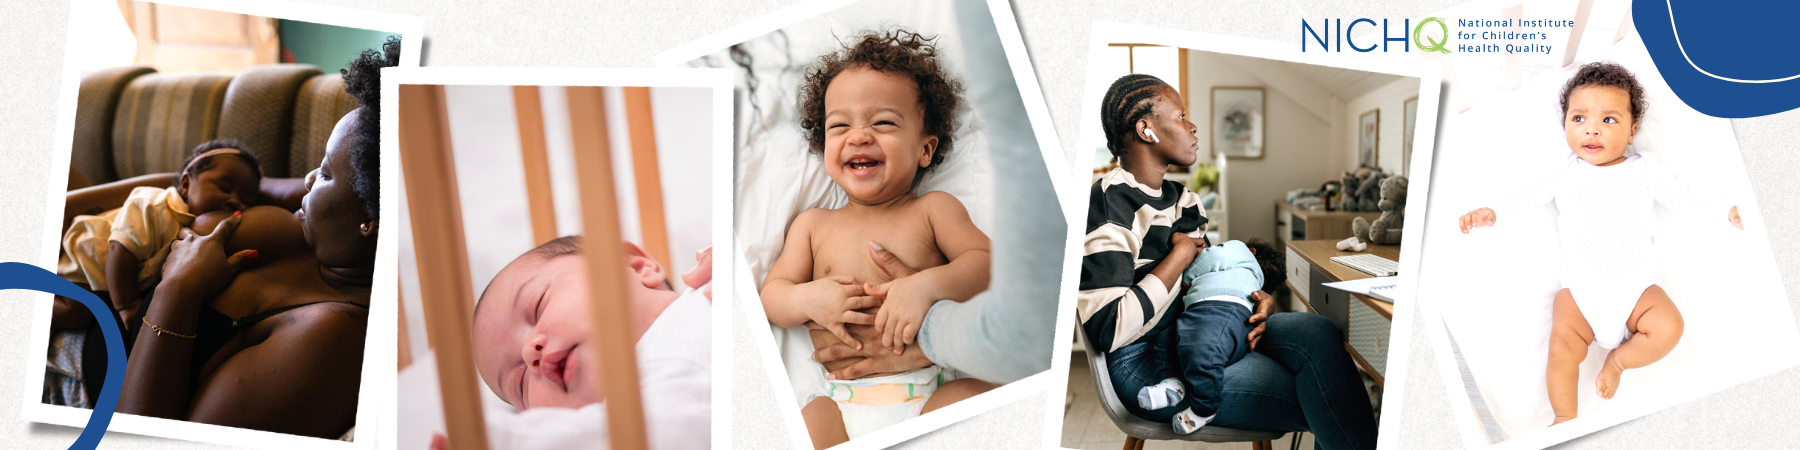 Black person breastfeeding/chestfeeding Black baby, Asian baby sleeping in crib, multiracial baby with light brown skin and curly har smiles while laying in crib, Black person chestfeeds their Black baby, Black baby smiles in crib laying on their back